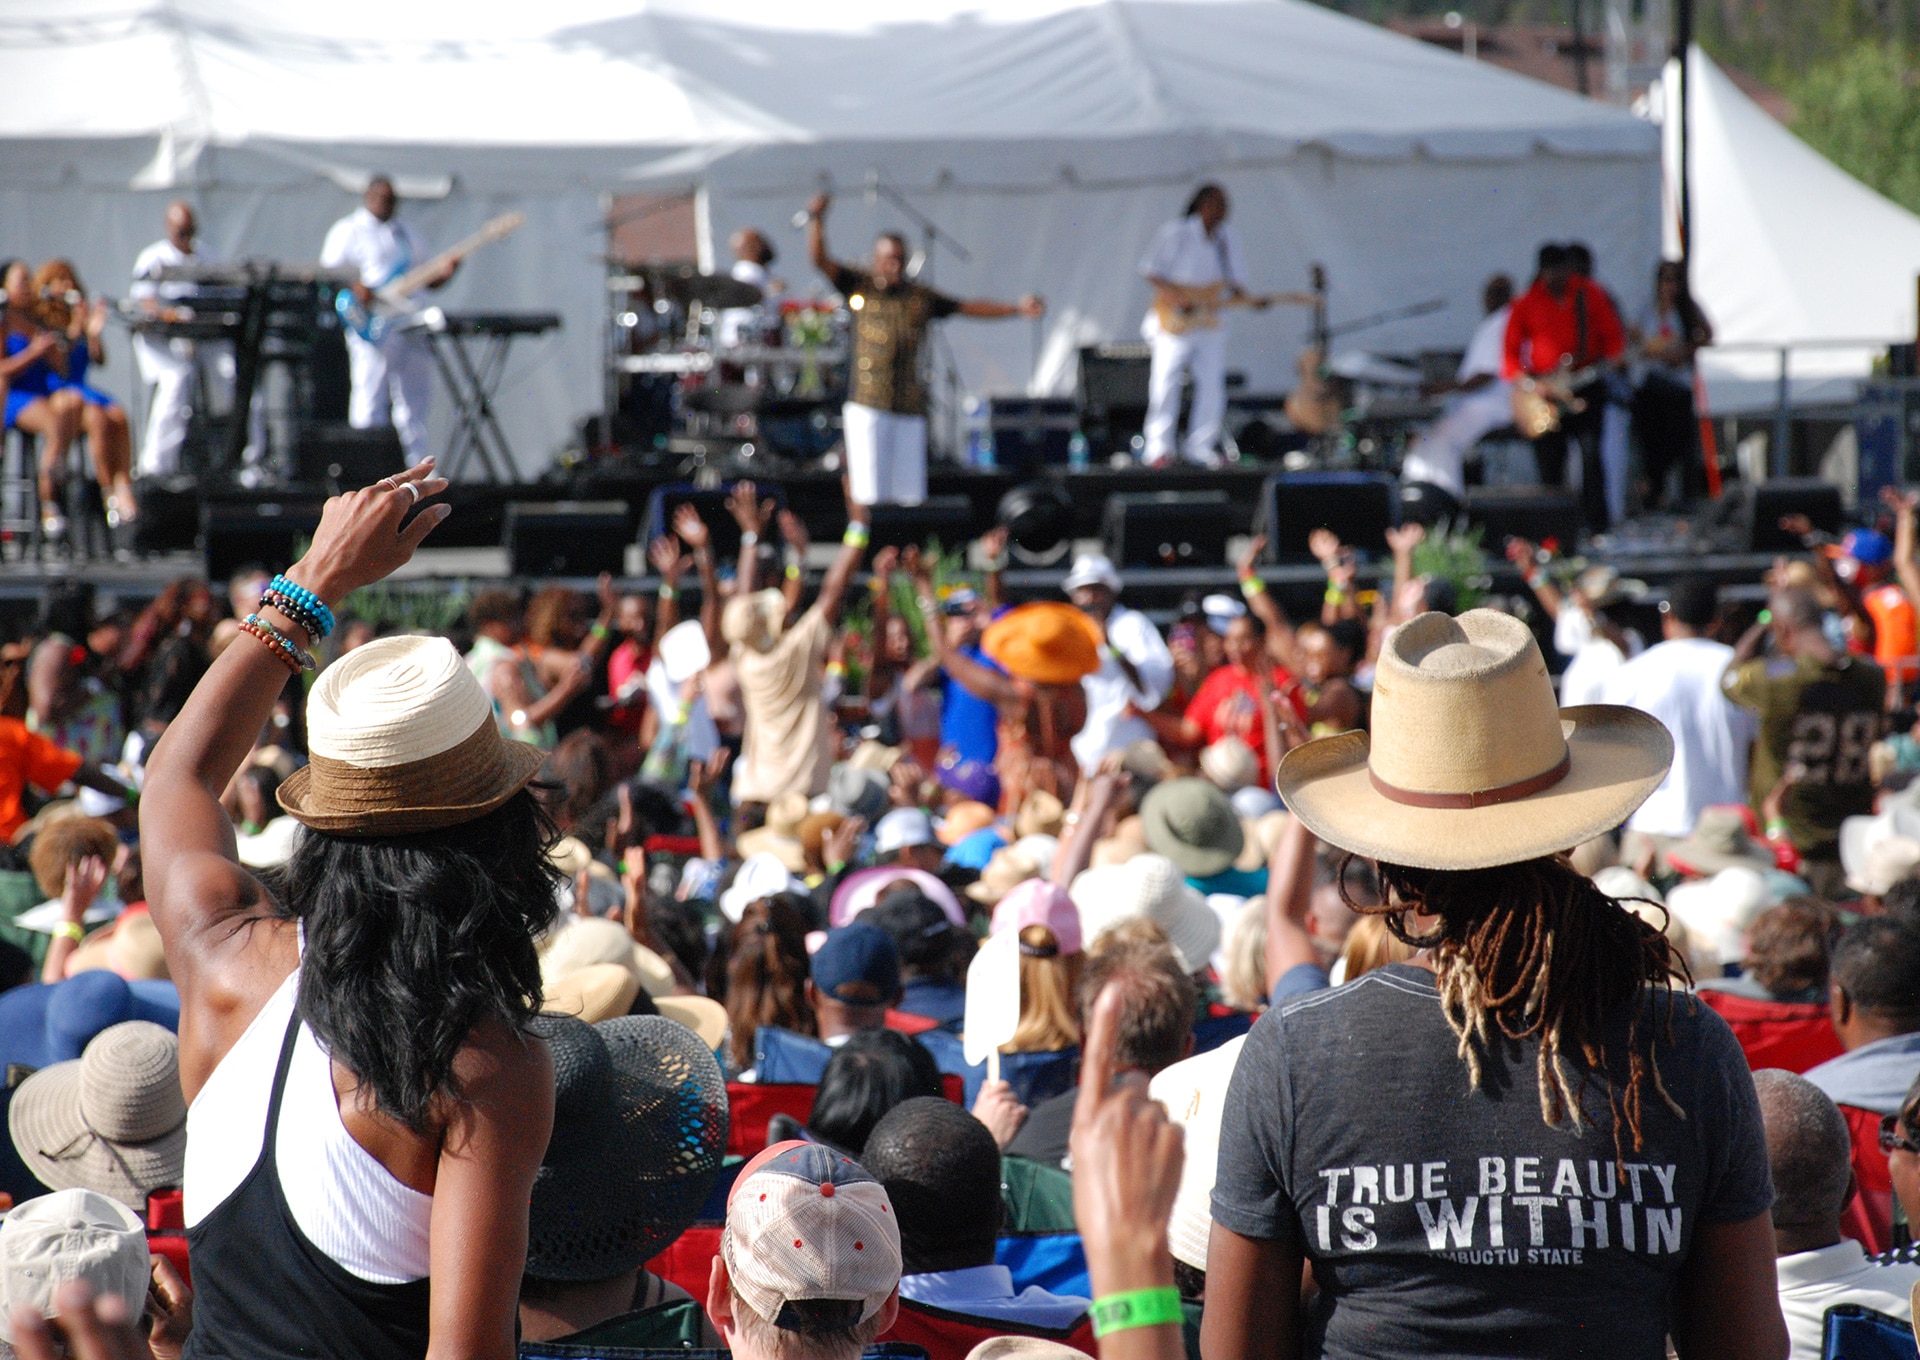 38th Annual Winter Park Jazz Festival Line up July 18 & 19, 2020